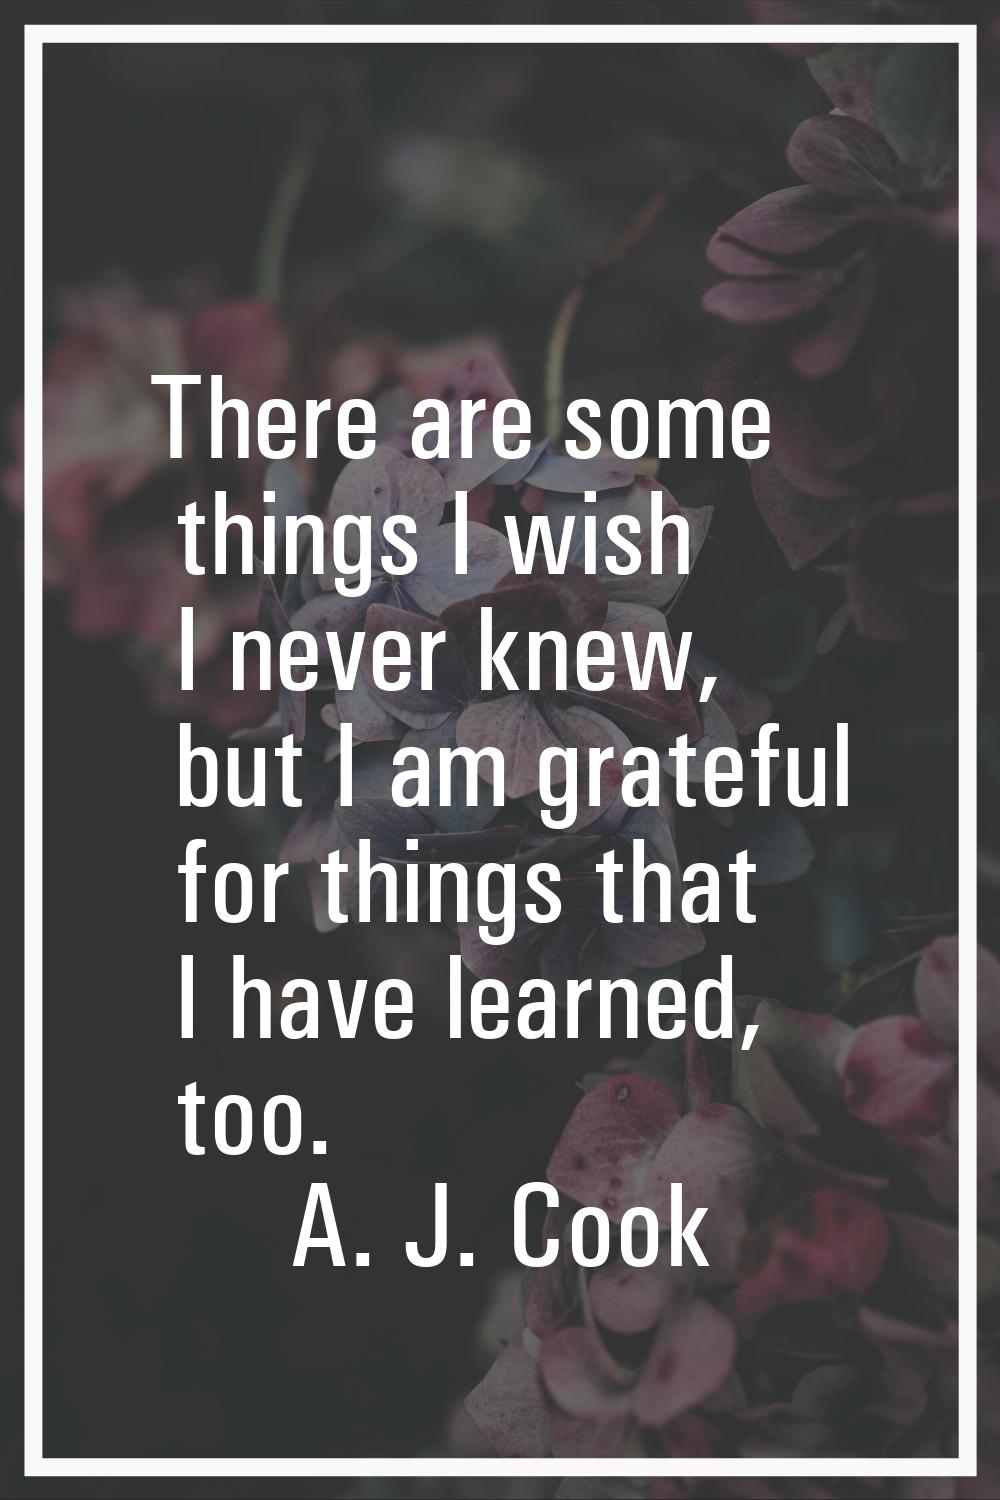 There are some things I wish I never knew, but I am grateful for things that I have learned, too.